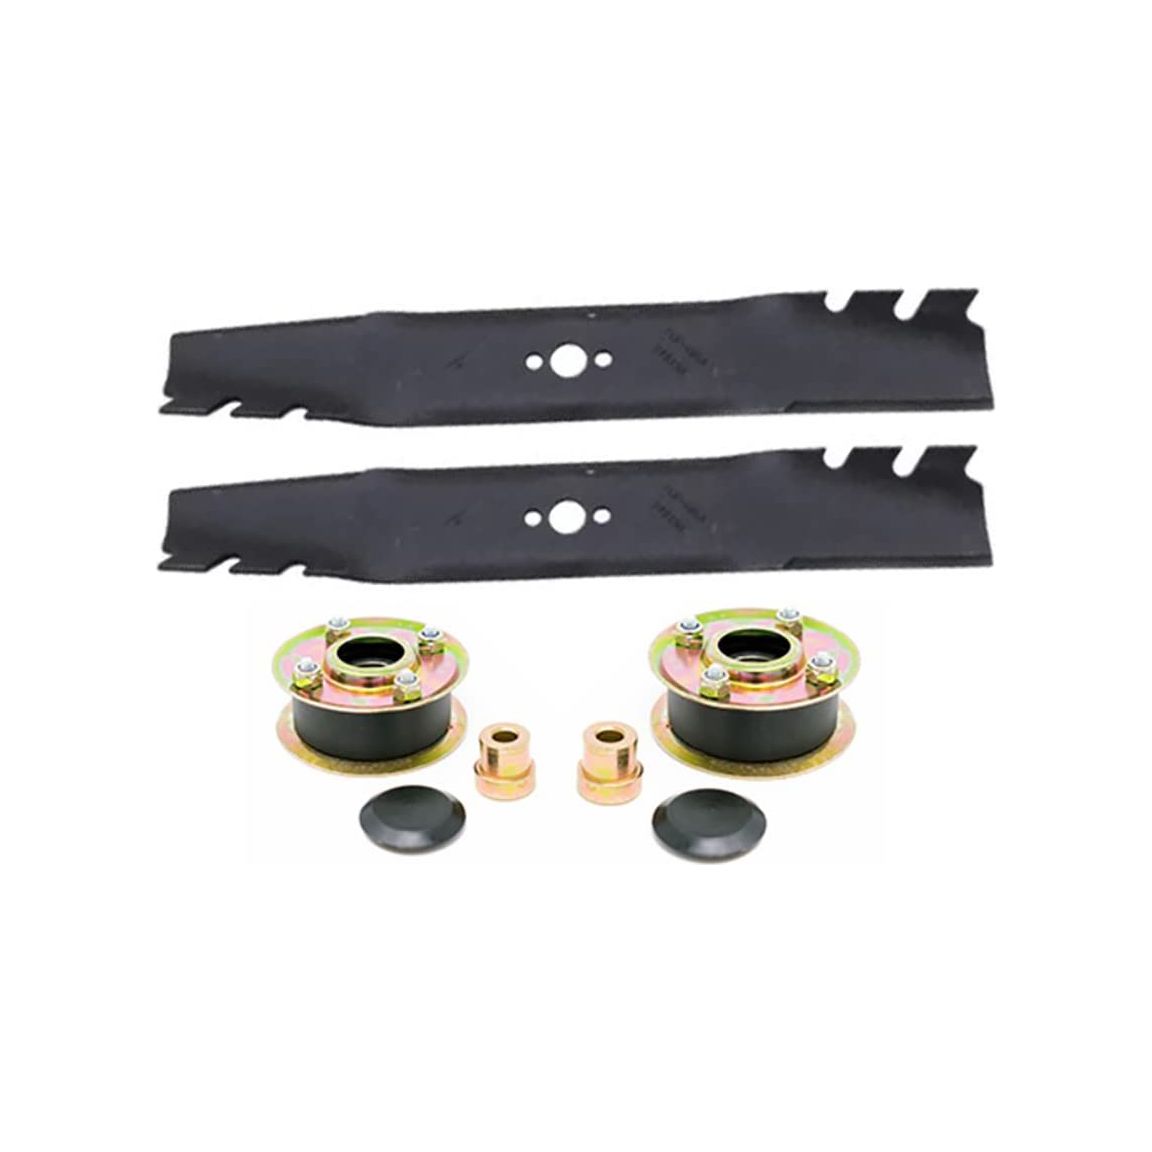 Genuine Toro Blade and Pulley Kit For Toro TimeMaster/Turfmaster and Exmark 30 Inch Commercial Lawnmowers